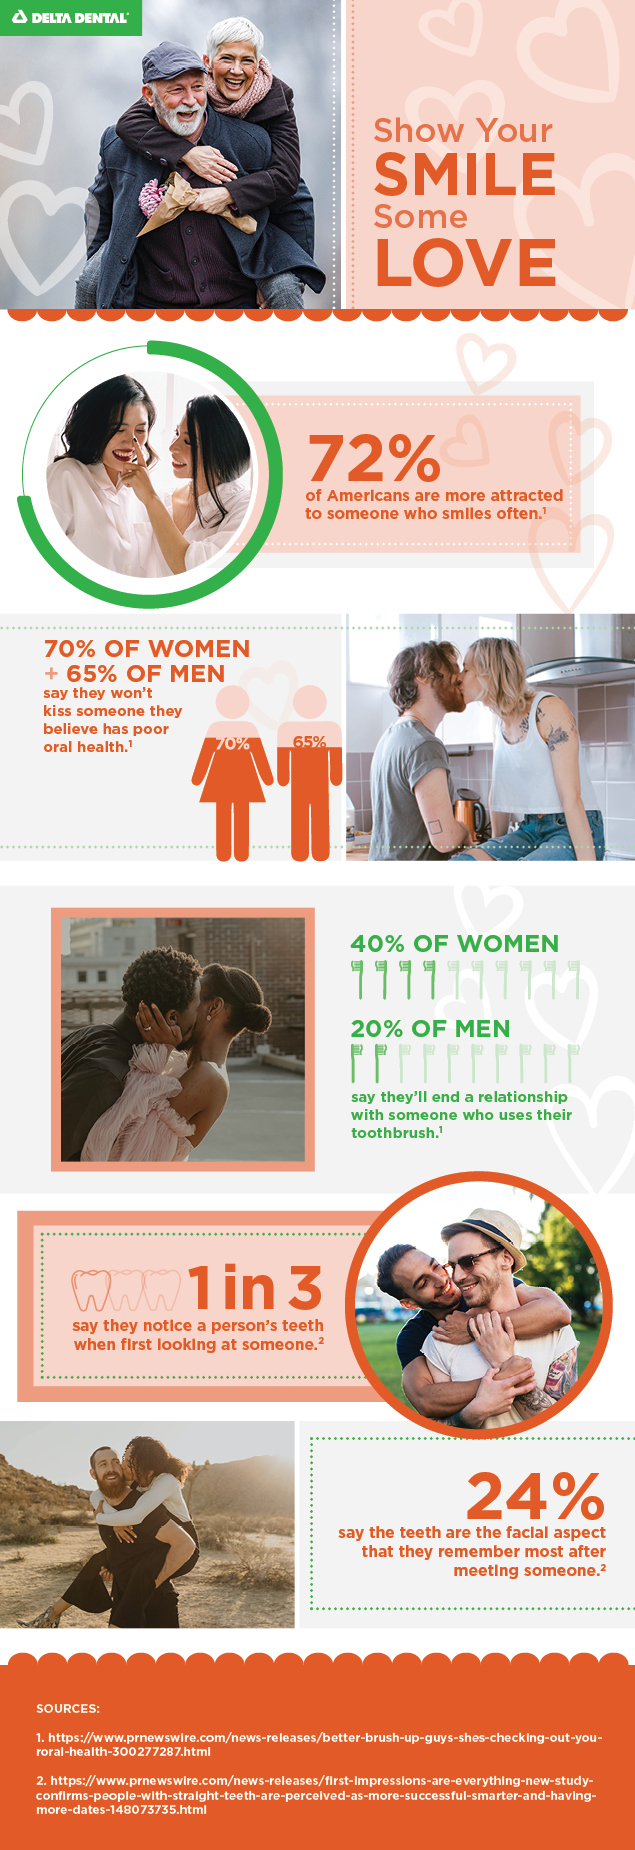 Delta Dental surveyed Americans about the love connection to oral health. We found that three-quarters of the nation's women consider good oral health to be one of the sexiest qualities in a partner!